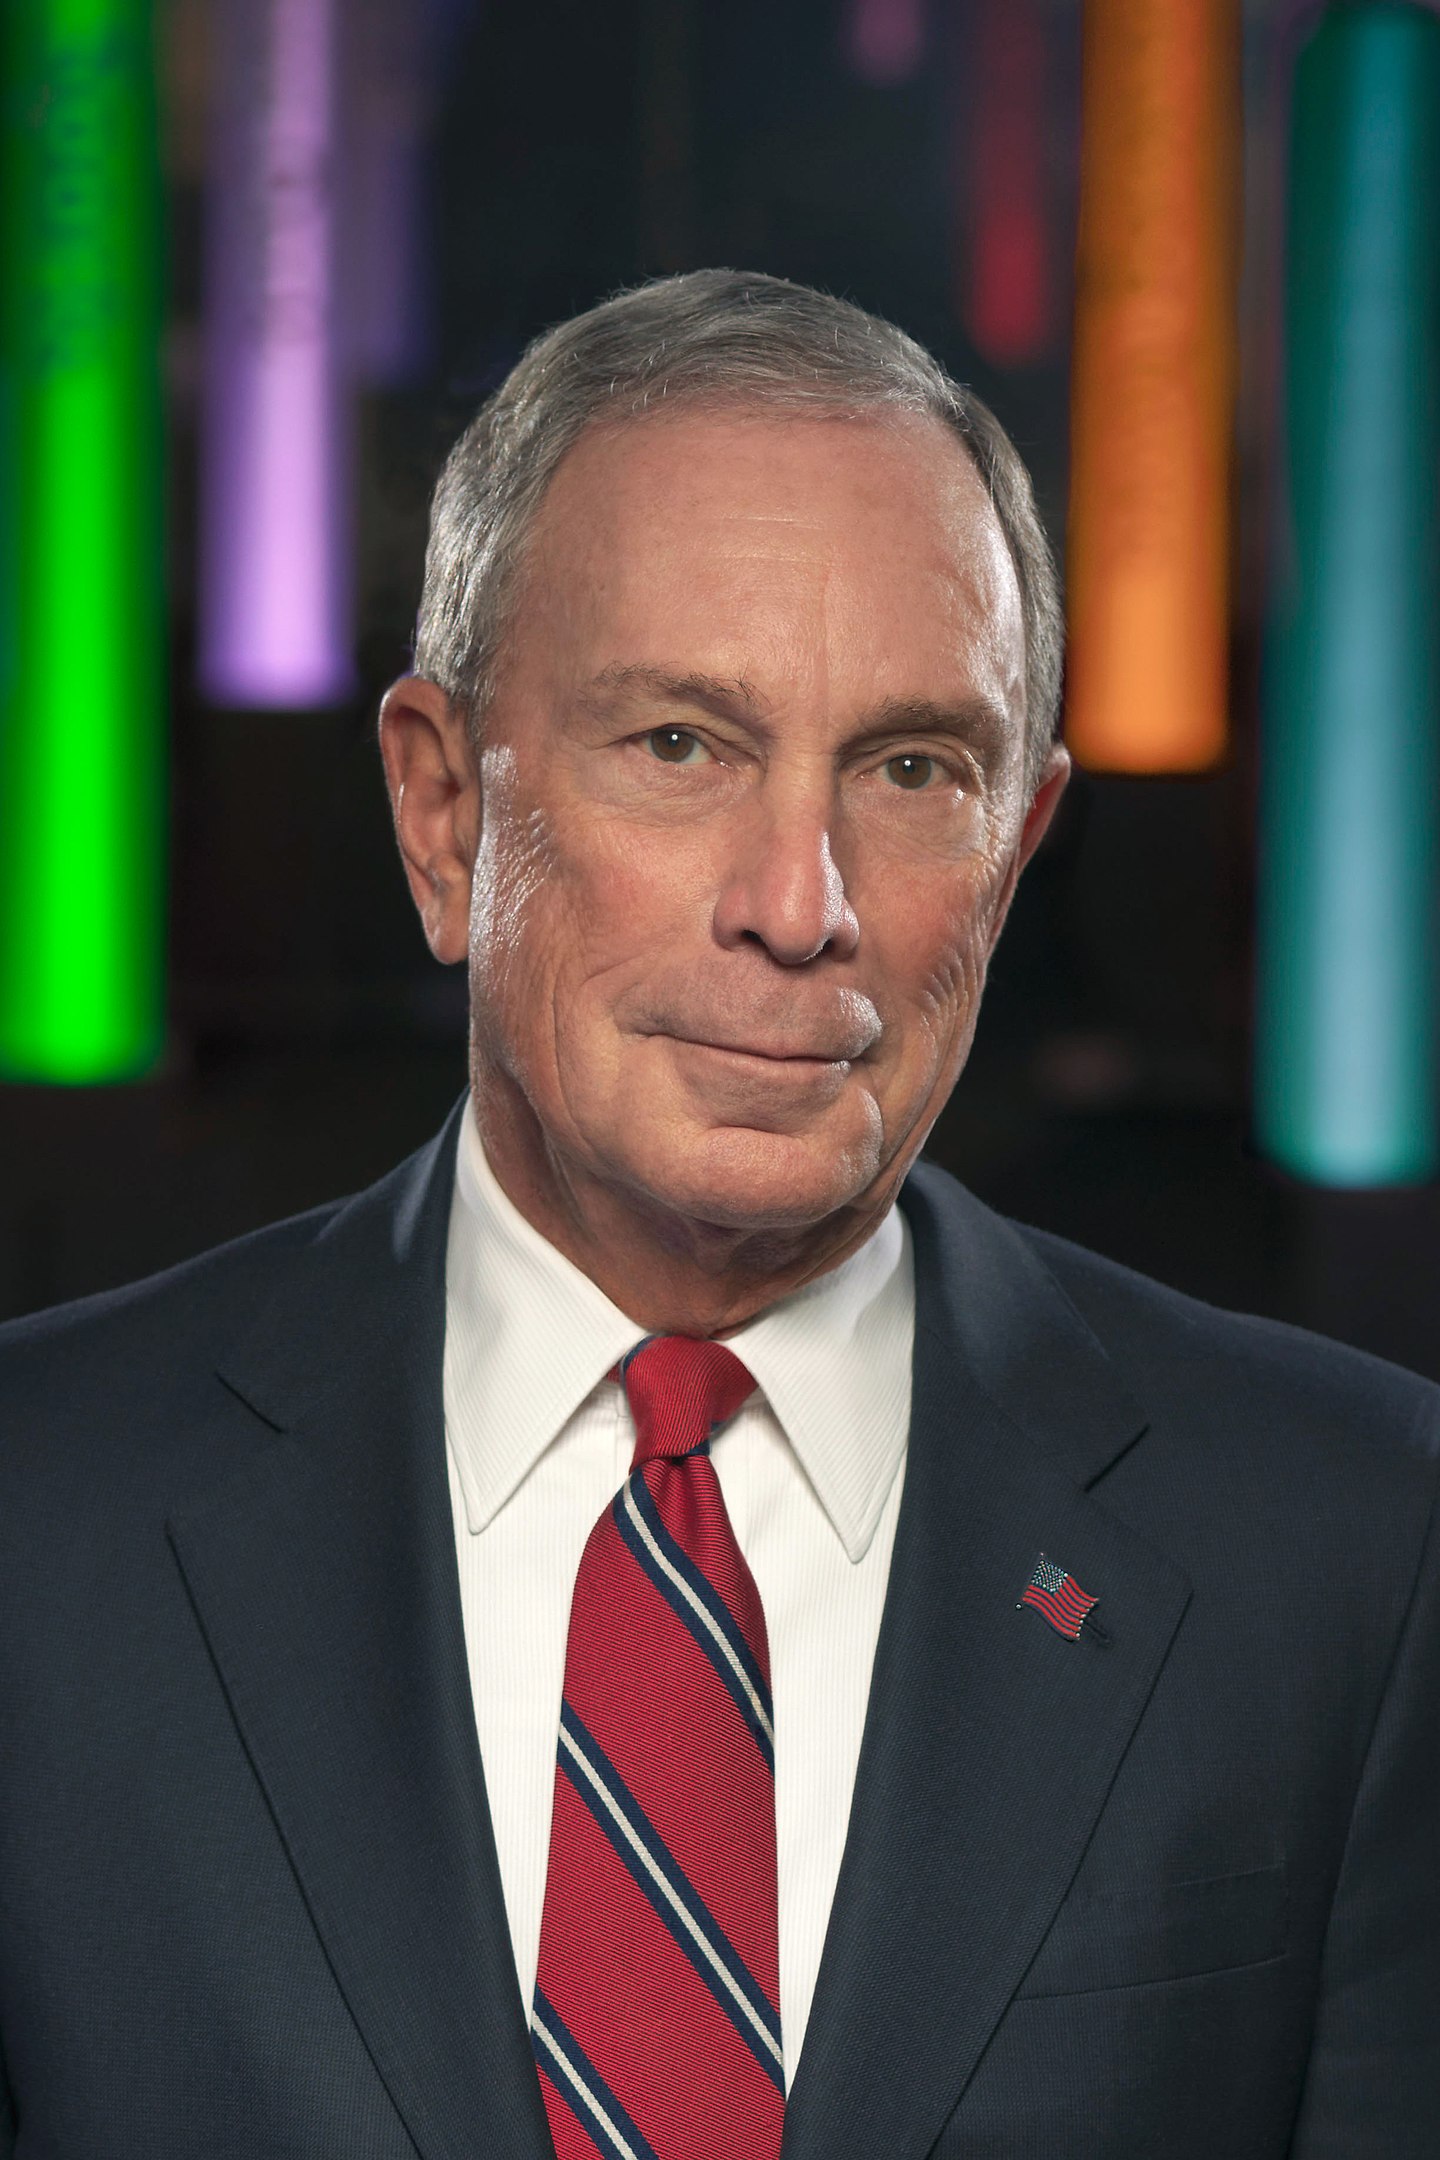 Michael Bloomberg with a suit